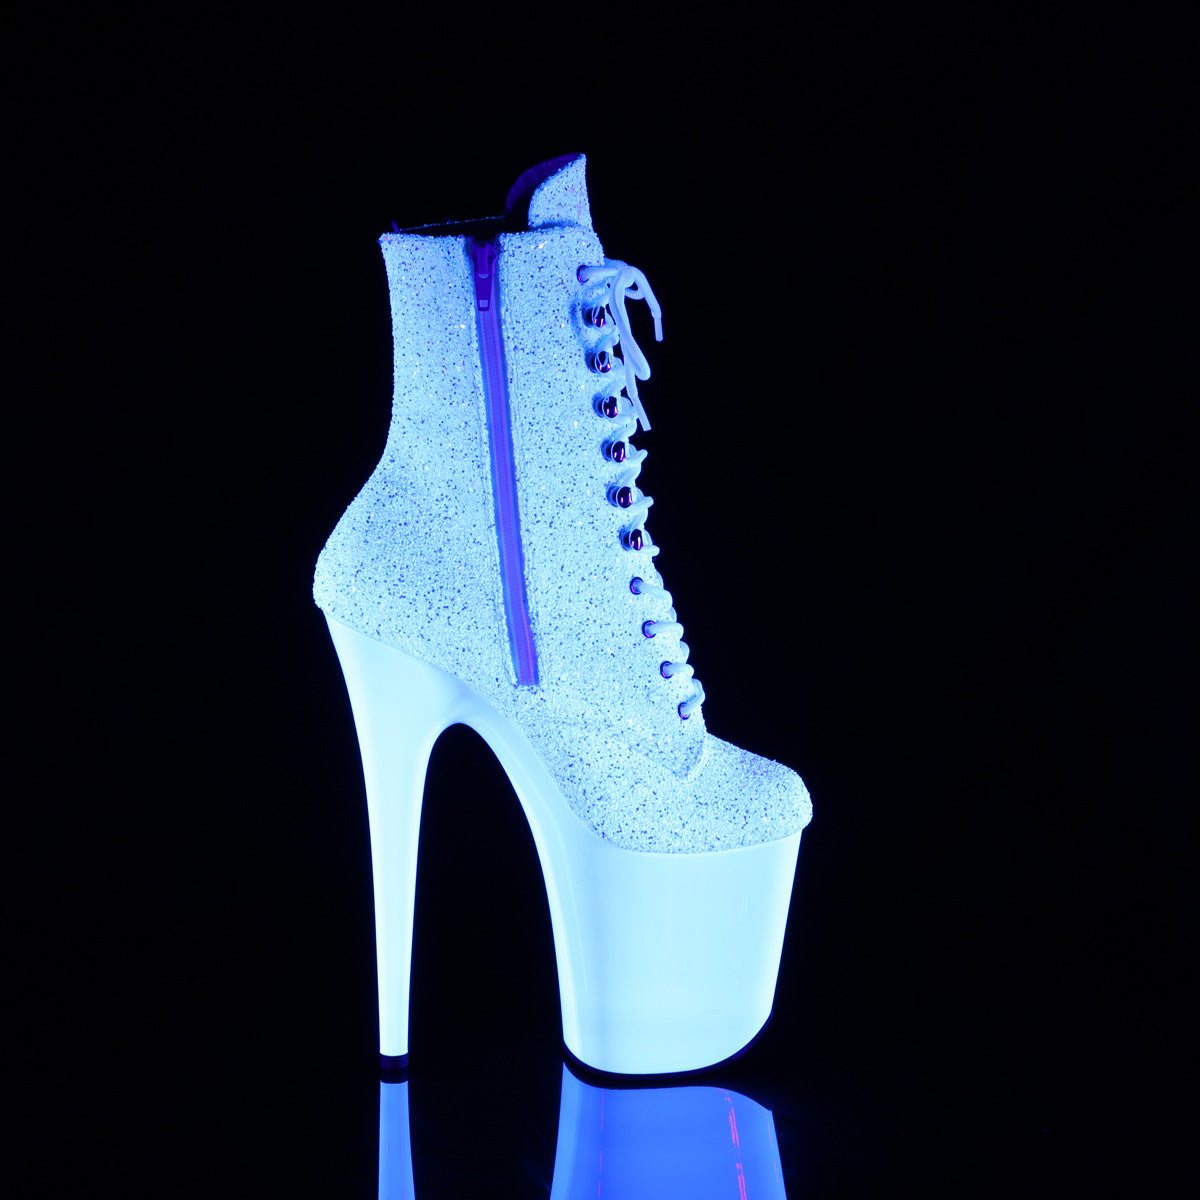 FLAMINGO-1020LG Pleaser 8 Inch Heel Neon White Glitter Ankle Boots Exotic Dancing